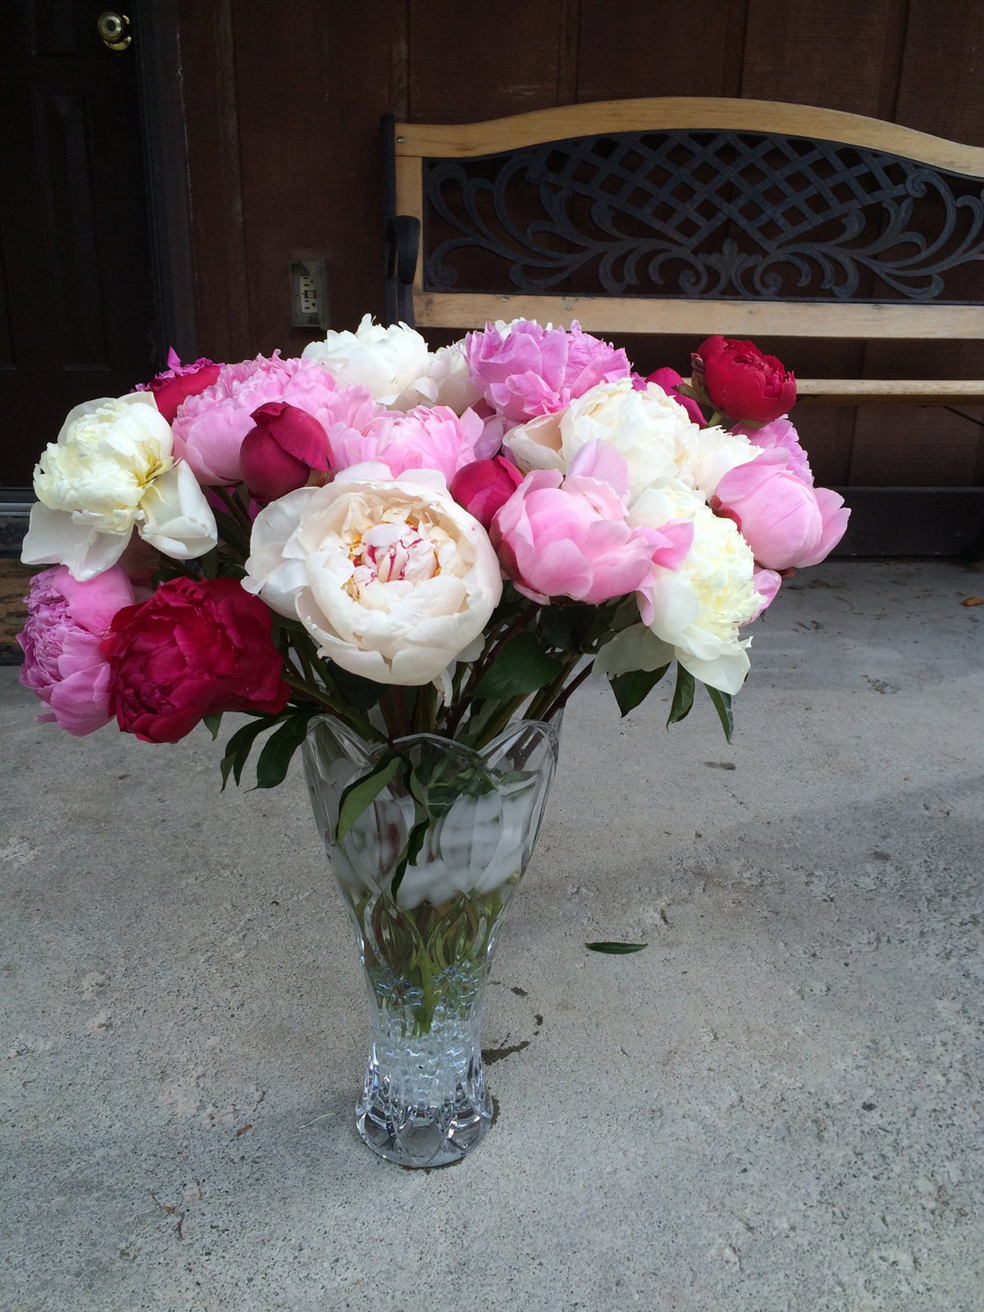 Alaska Perfect Peony owner Rita Jo Shoultz of Homer prepared a bouquet for President Obama’s hotel suite in Anchorage. Shoultz credited Sen. Lisa Murkowski, R-Alaska, for making it possible for her peonies to play a part in the presidential visit.-Photo provided